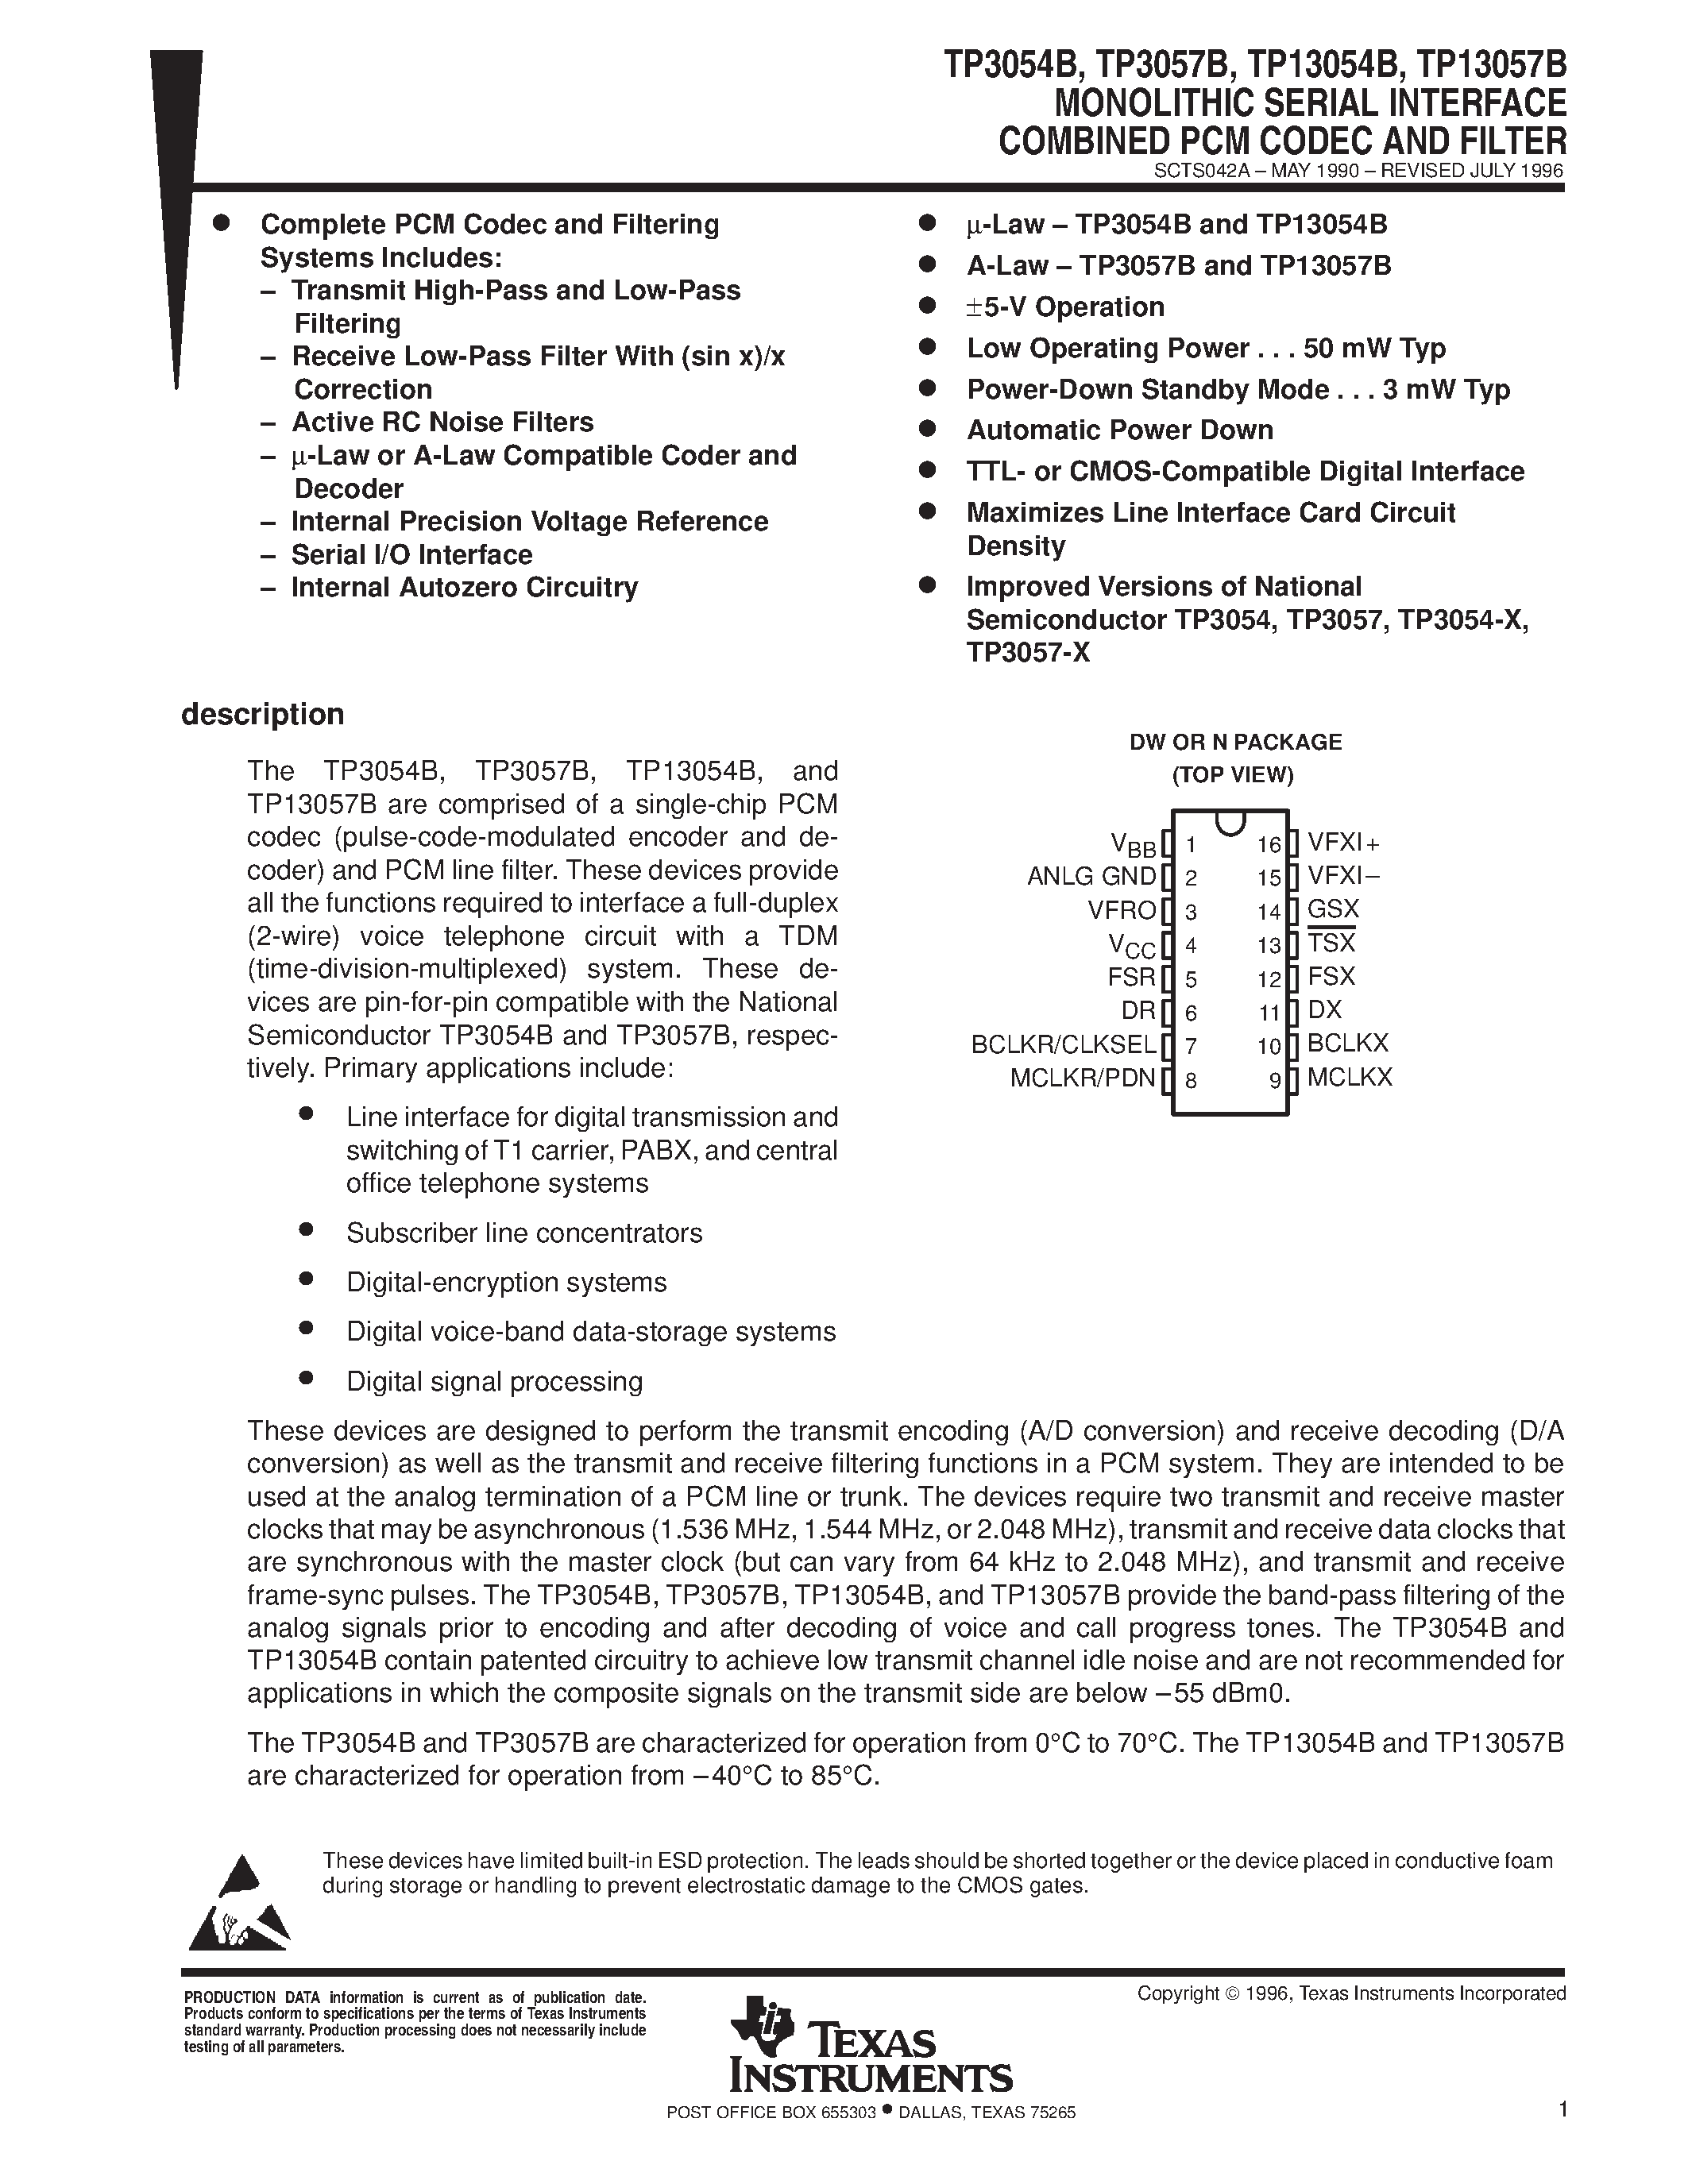 Datasheet TP13057BN - MONOLITHIC SERIAL INTERFACE COMBINED PCM CODEC AND FILTER page 1